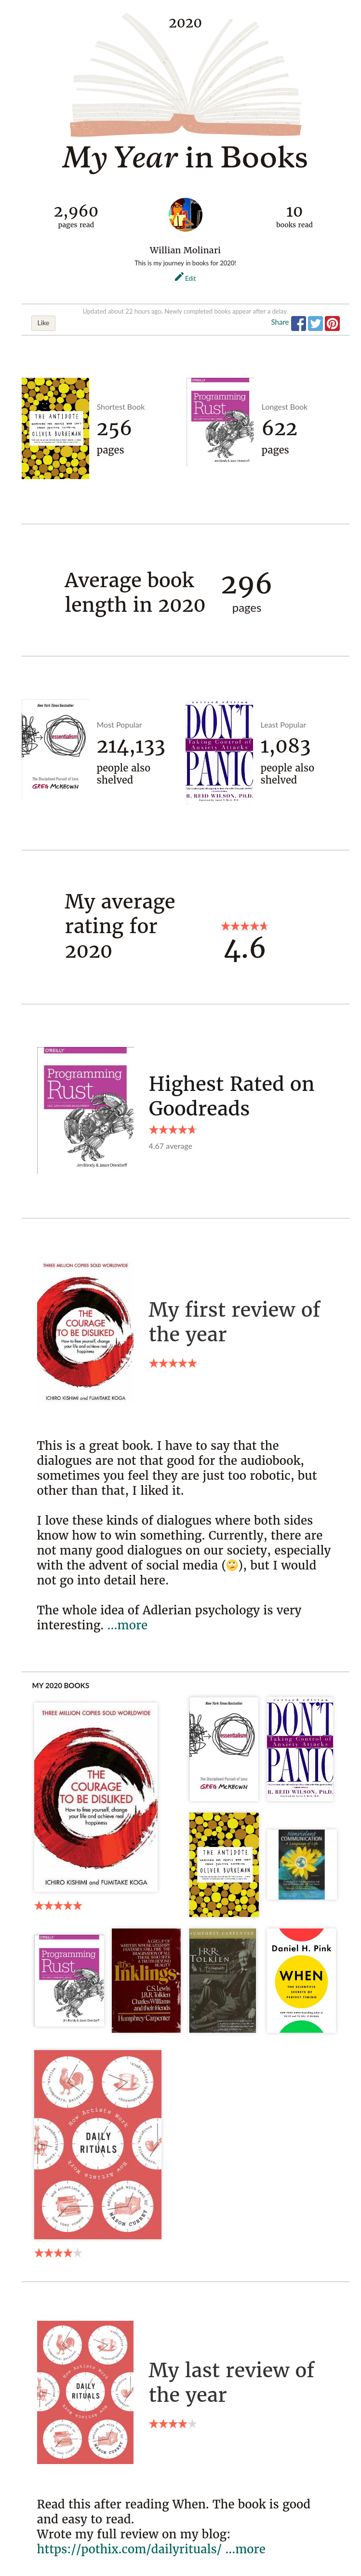 Year in books from Goodreads